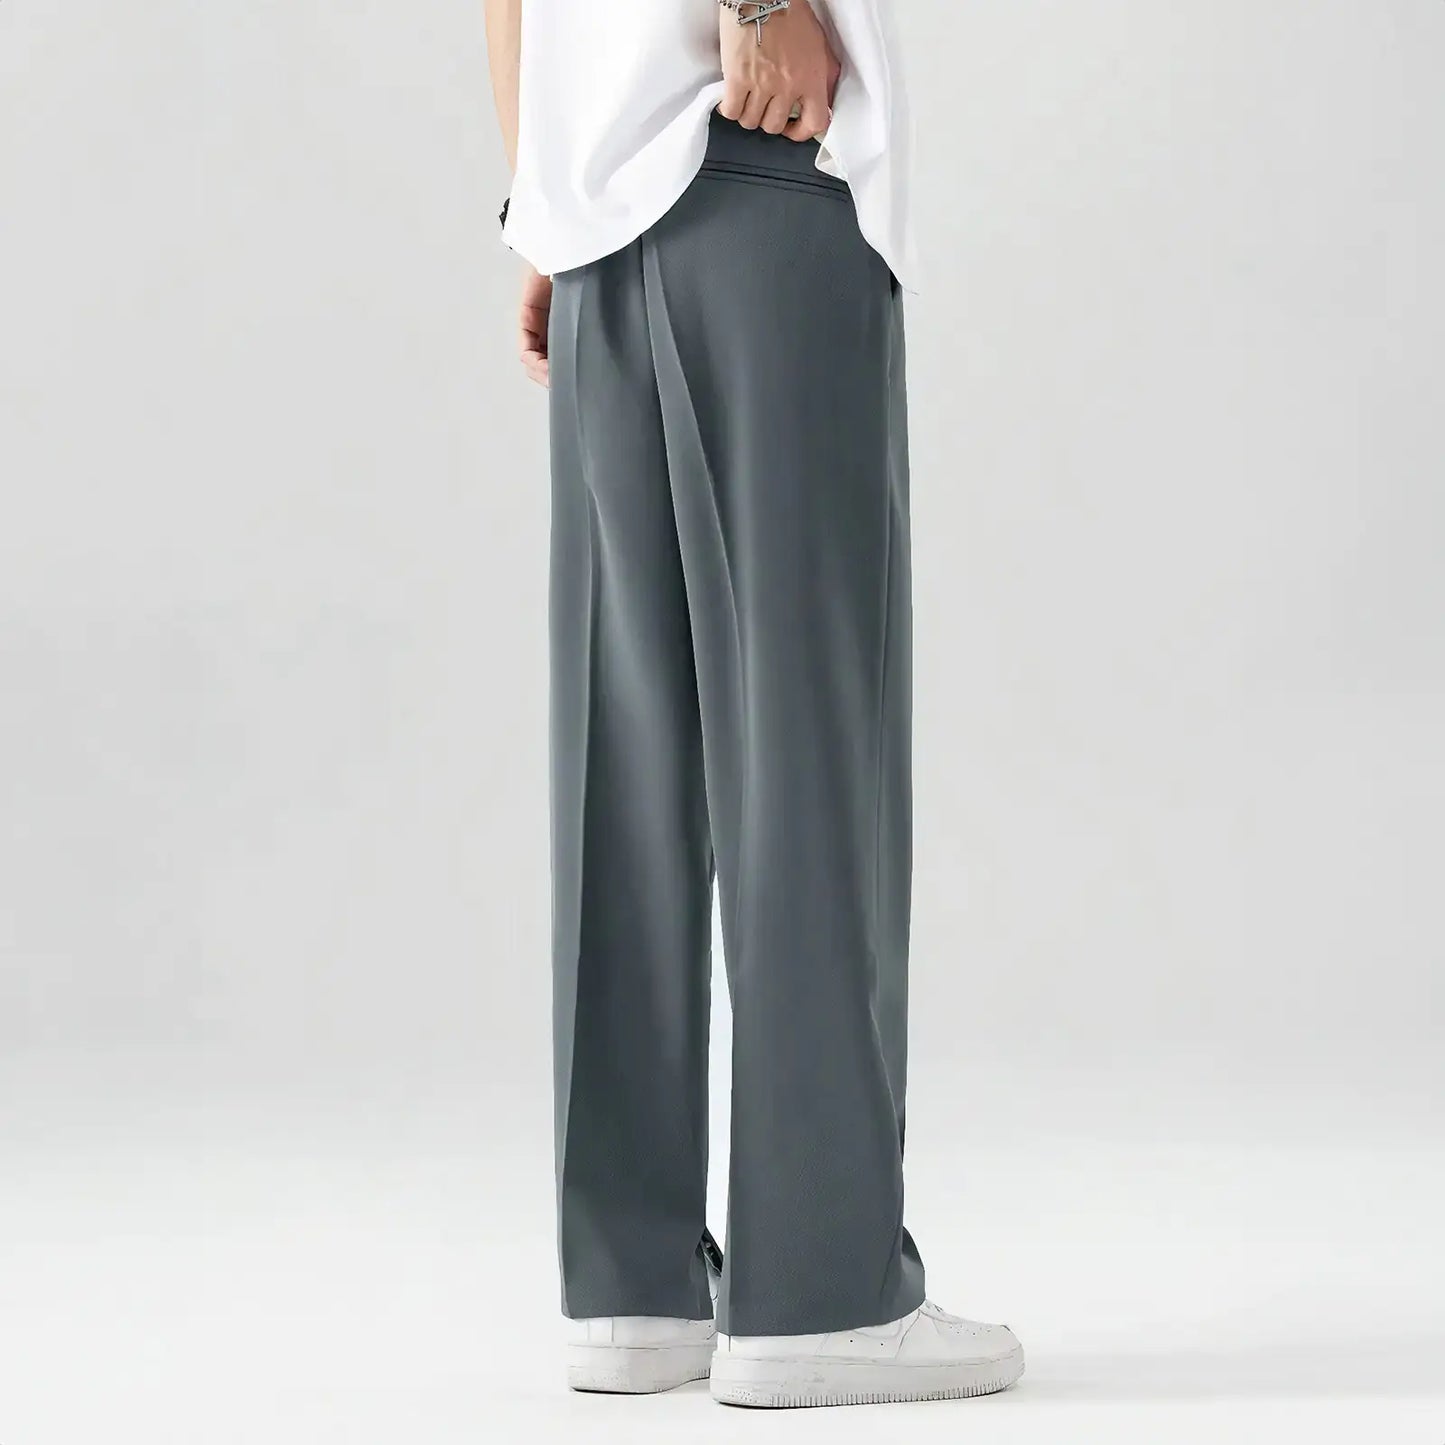 Elegant trousers with straight legs